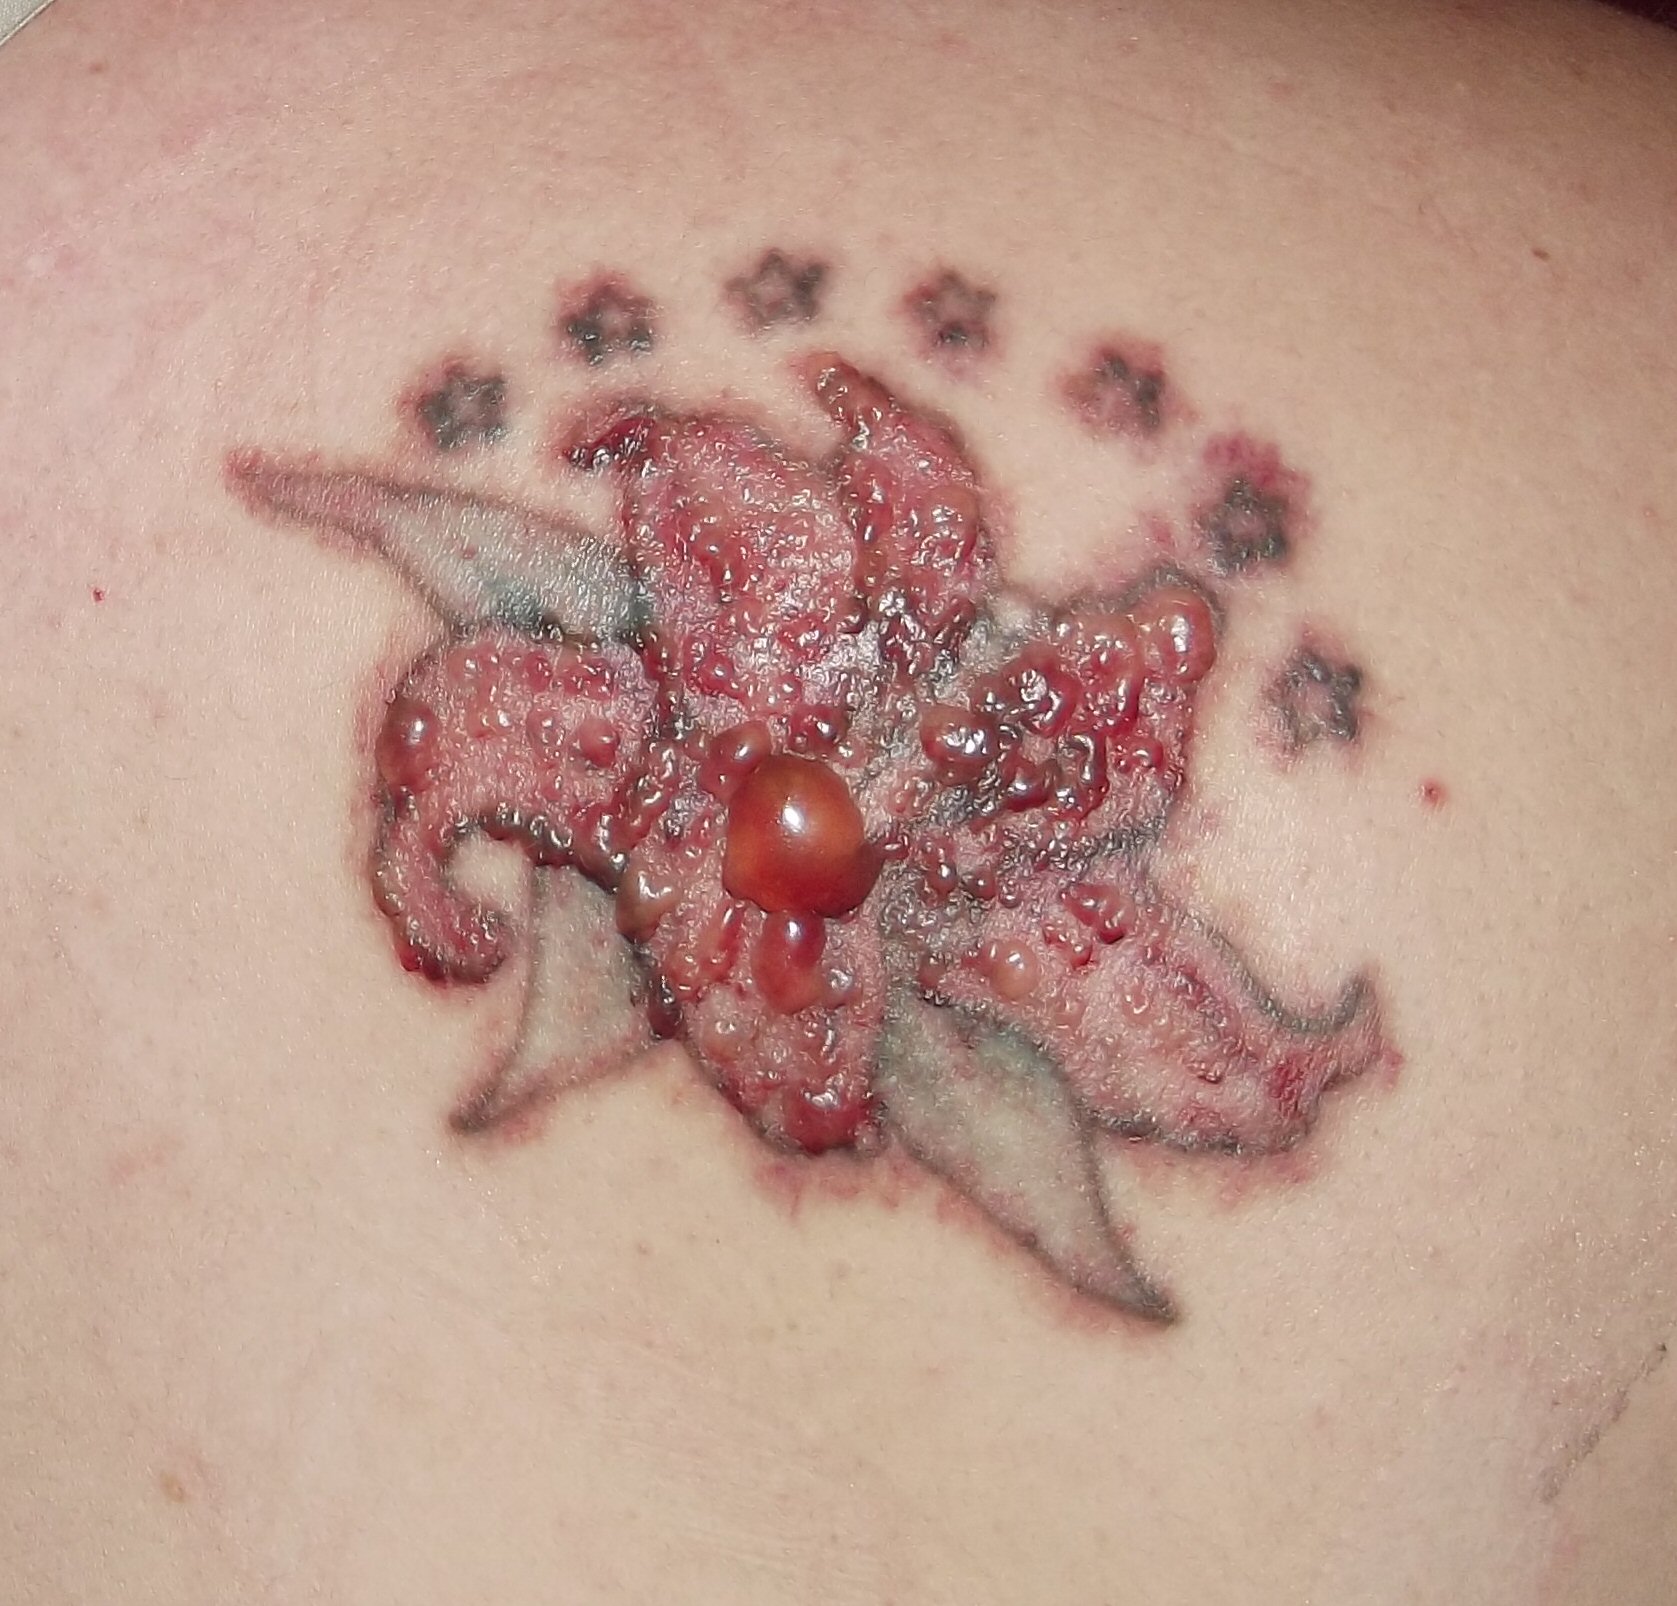 My Experience With R20 Laser Tattoo Removal